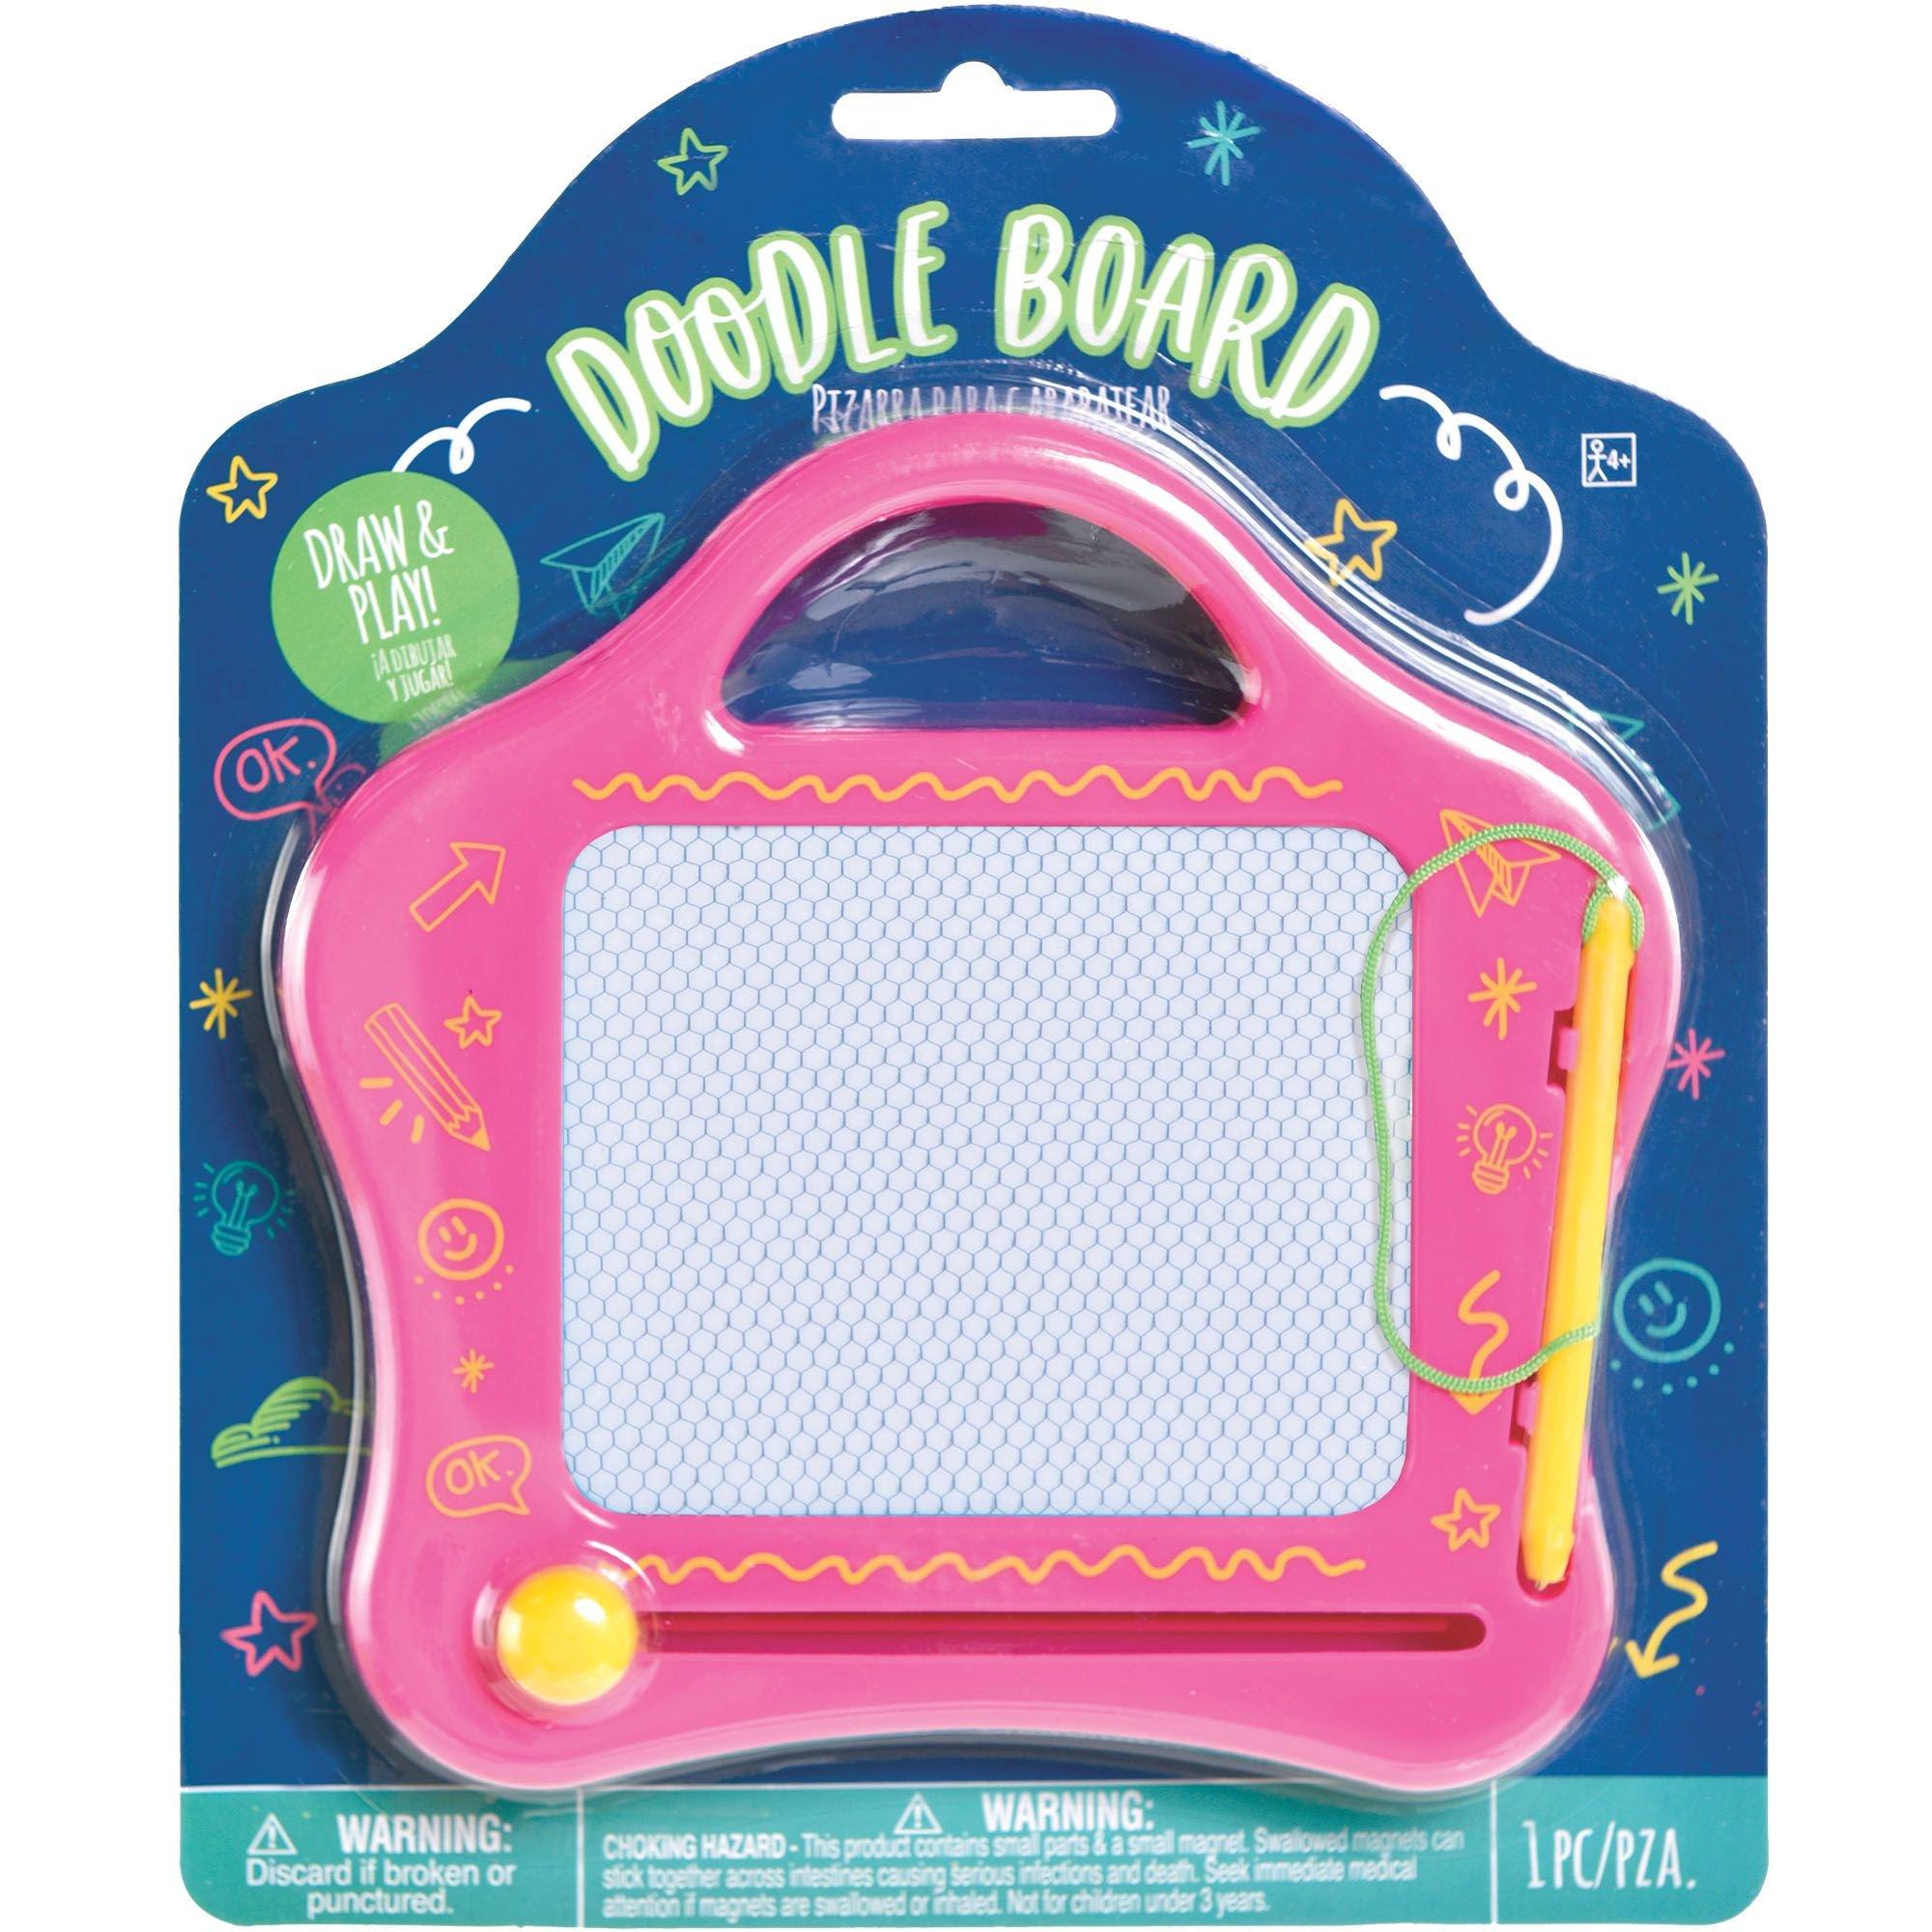 Cute Magnetic Drawing Board Doodle Sketch Pad for Toddler Girls/Boys Pink